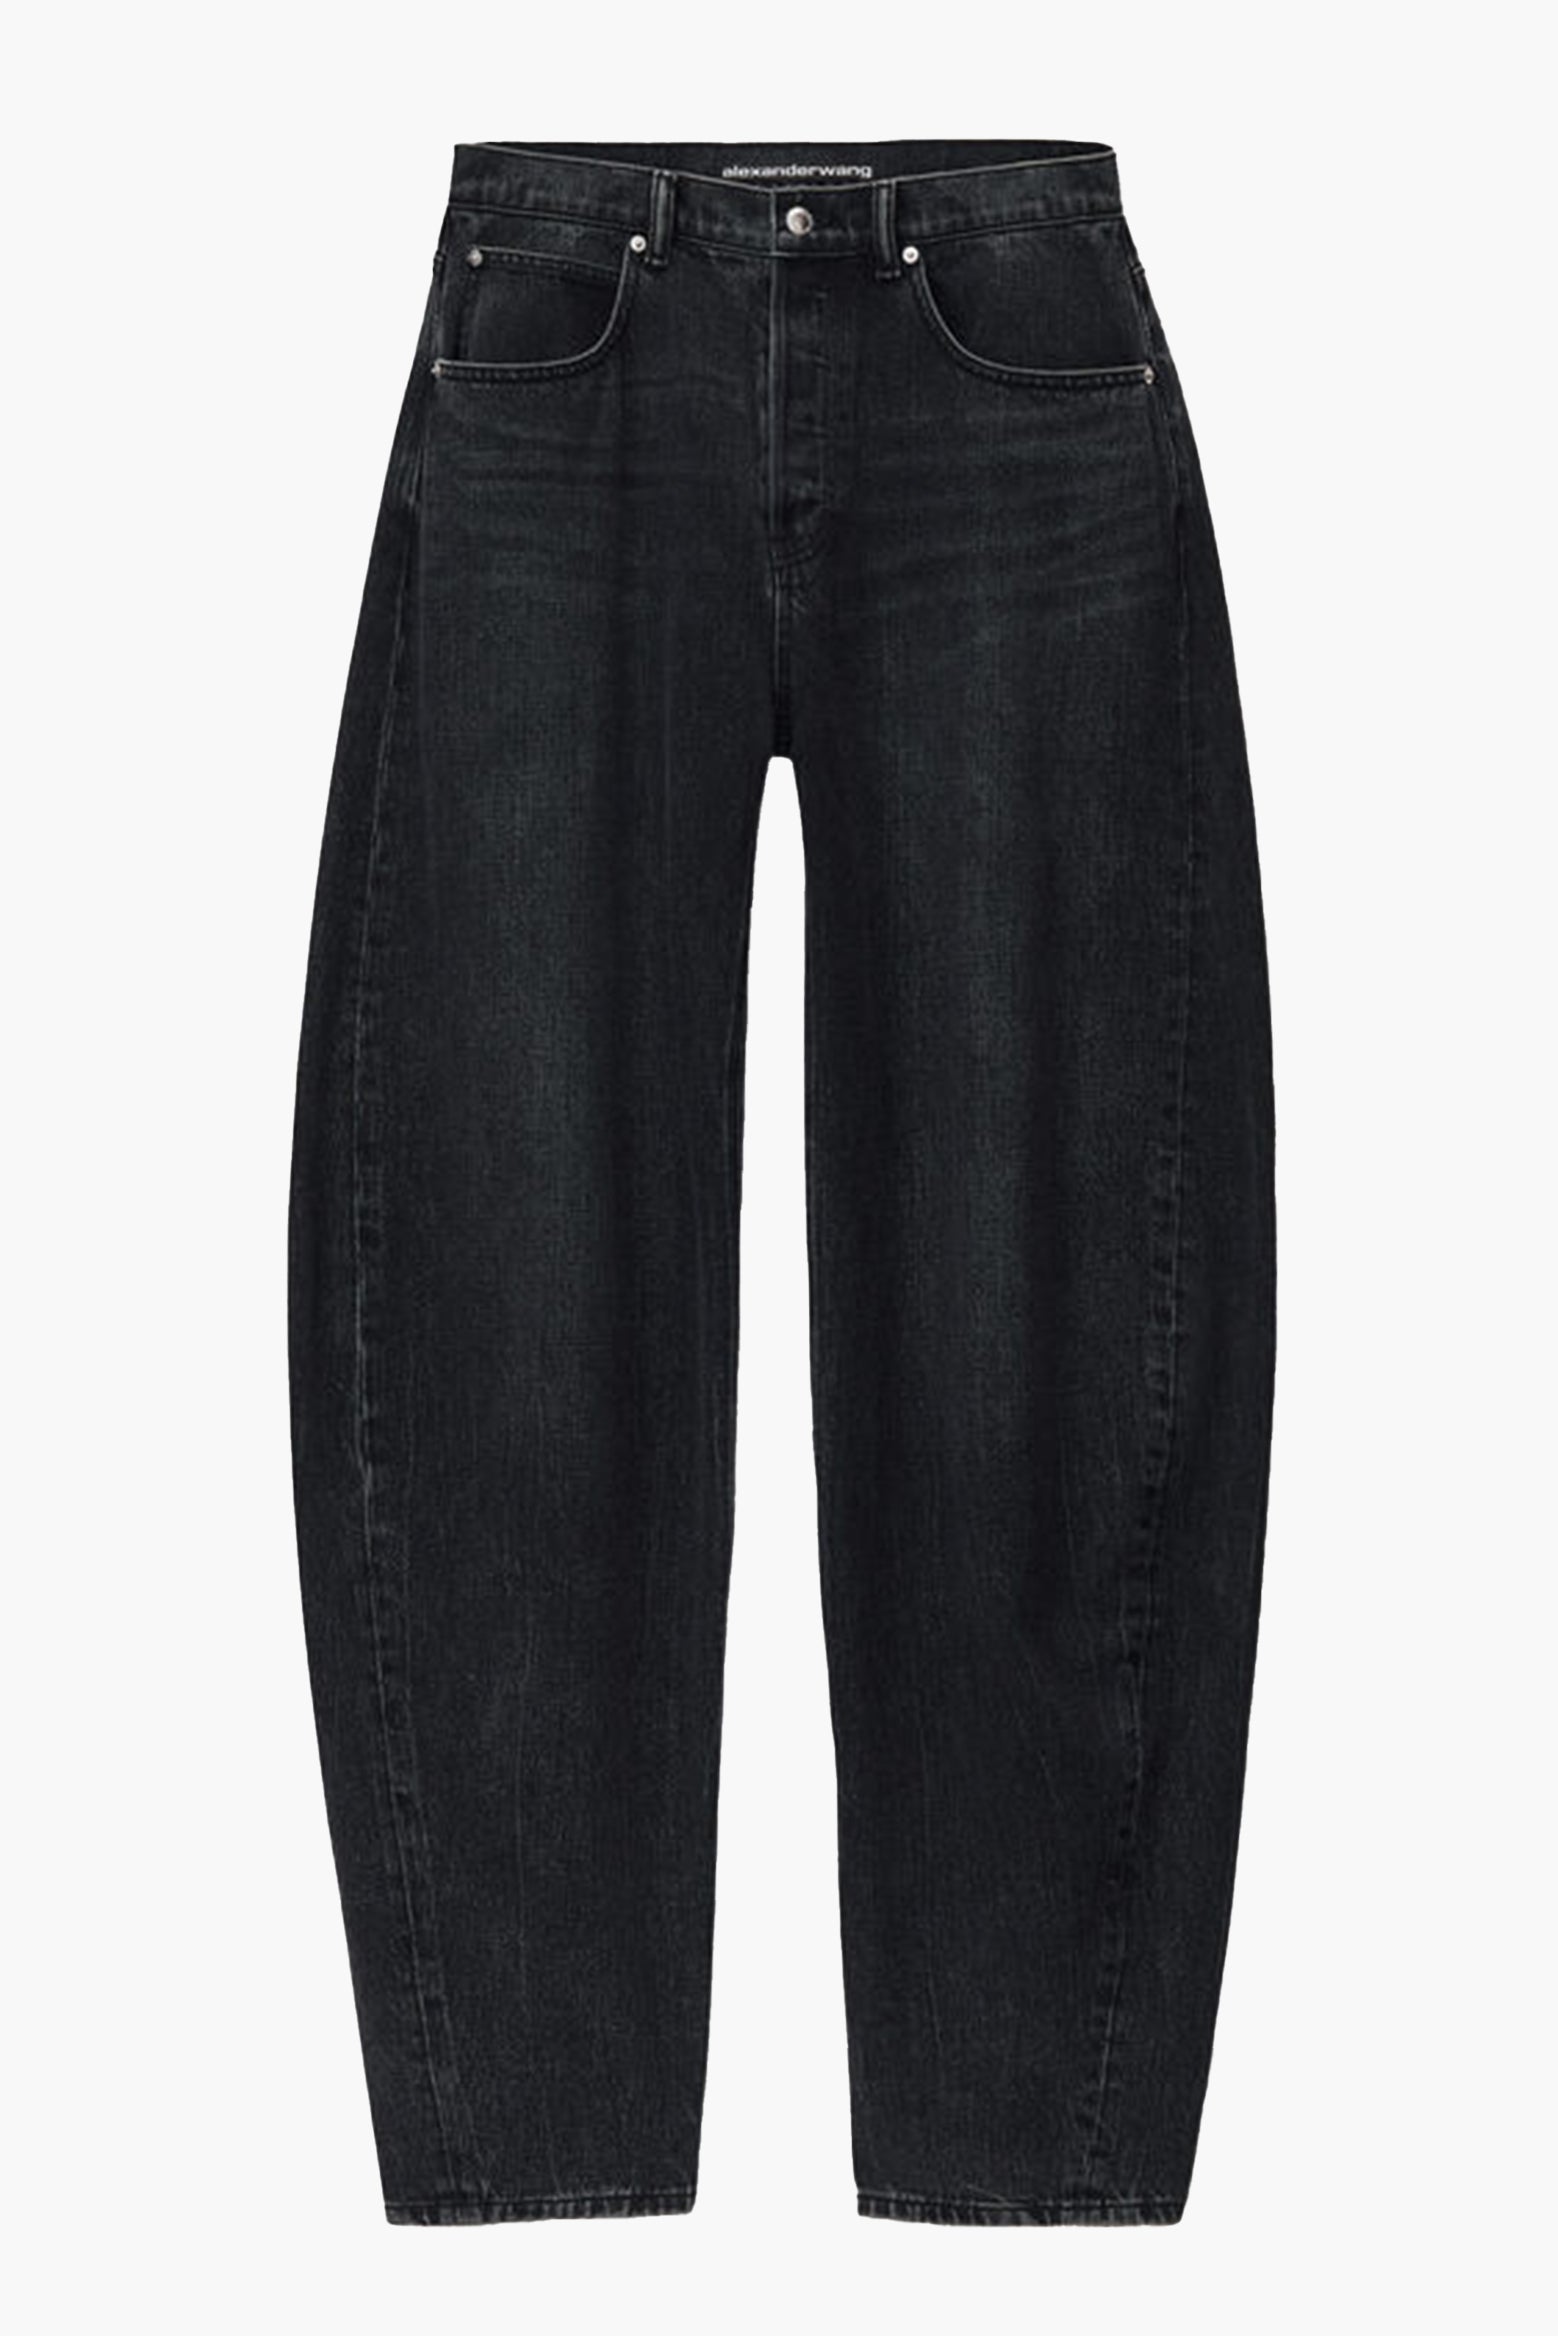 The Alexander Wang Oversized Rounded Low Rise Jean in Grey Aged available at The New Trend Australia